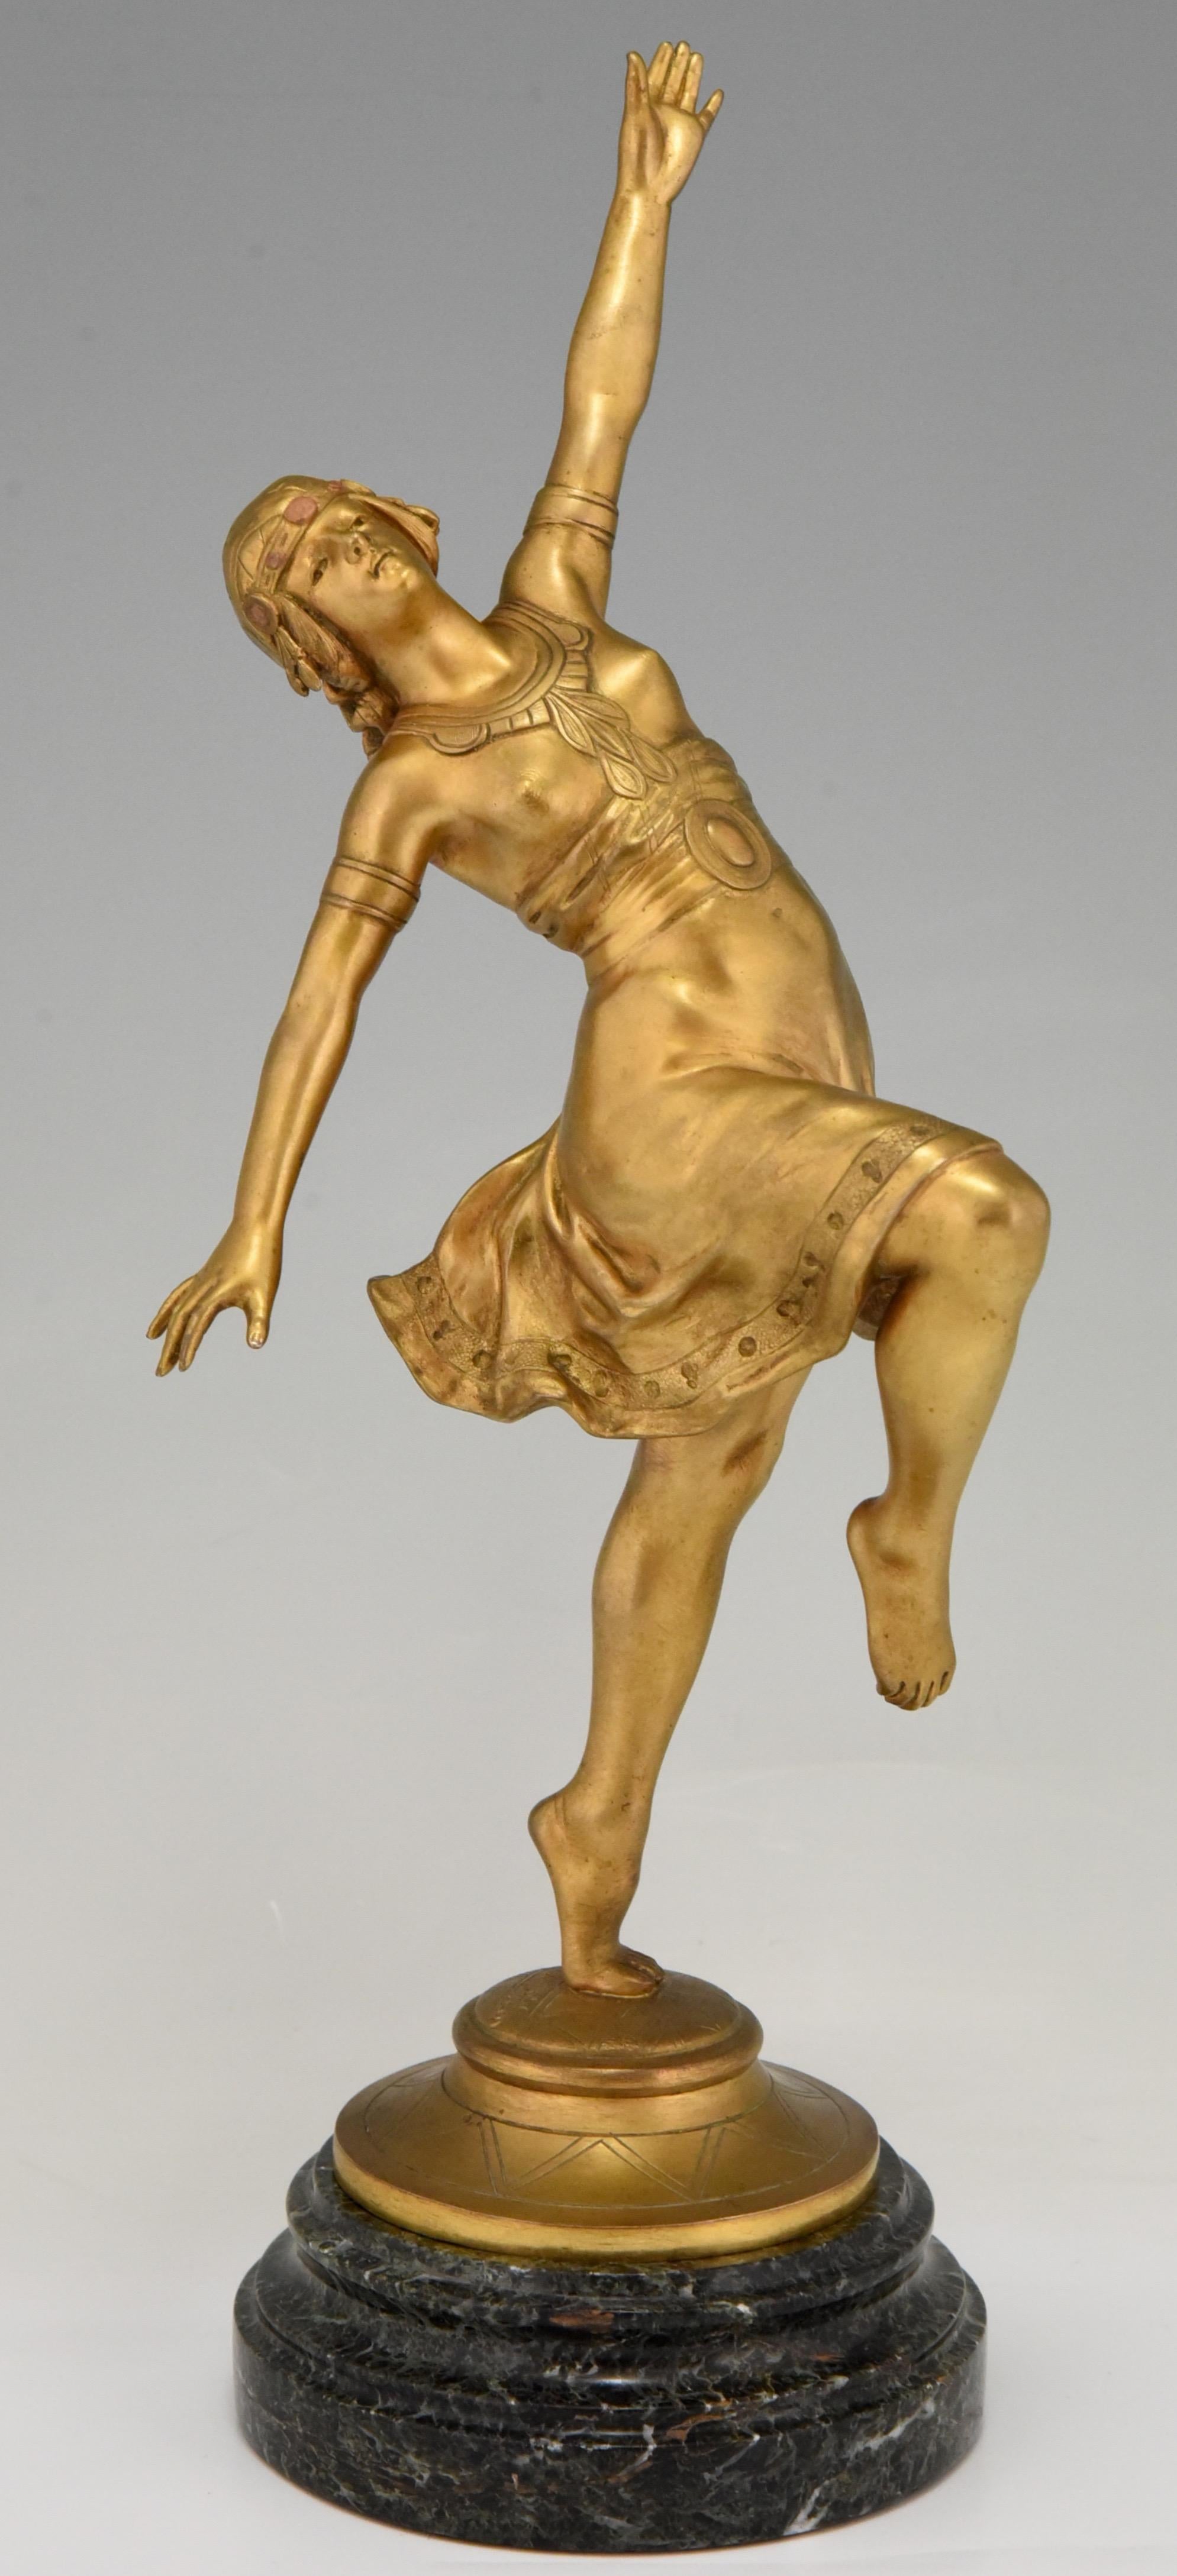 Art Nouveau bronze sculpture of an Oriental dancer. 
By the sculptor Jean Garnier, born in France in 1853.
With Founders signature of C. Villain. 
The sculpture has a gilt patina and stands on a circular marble base.